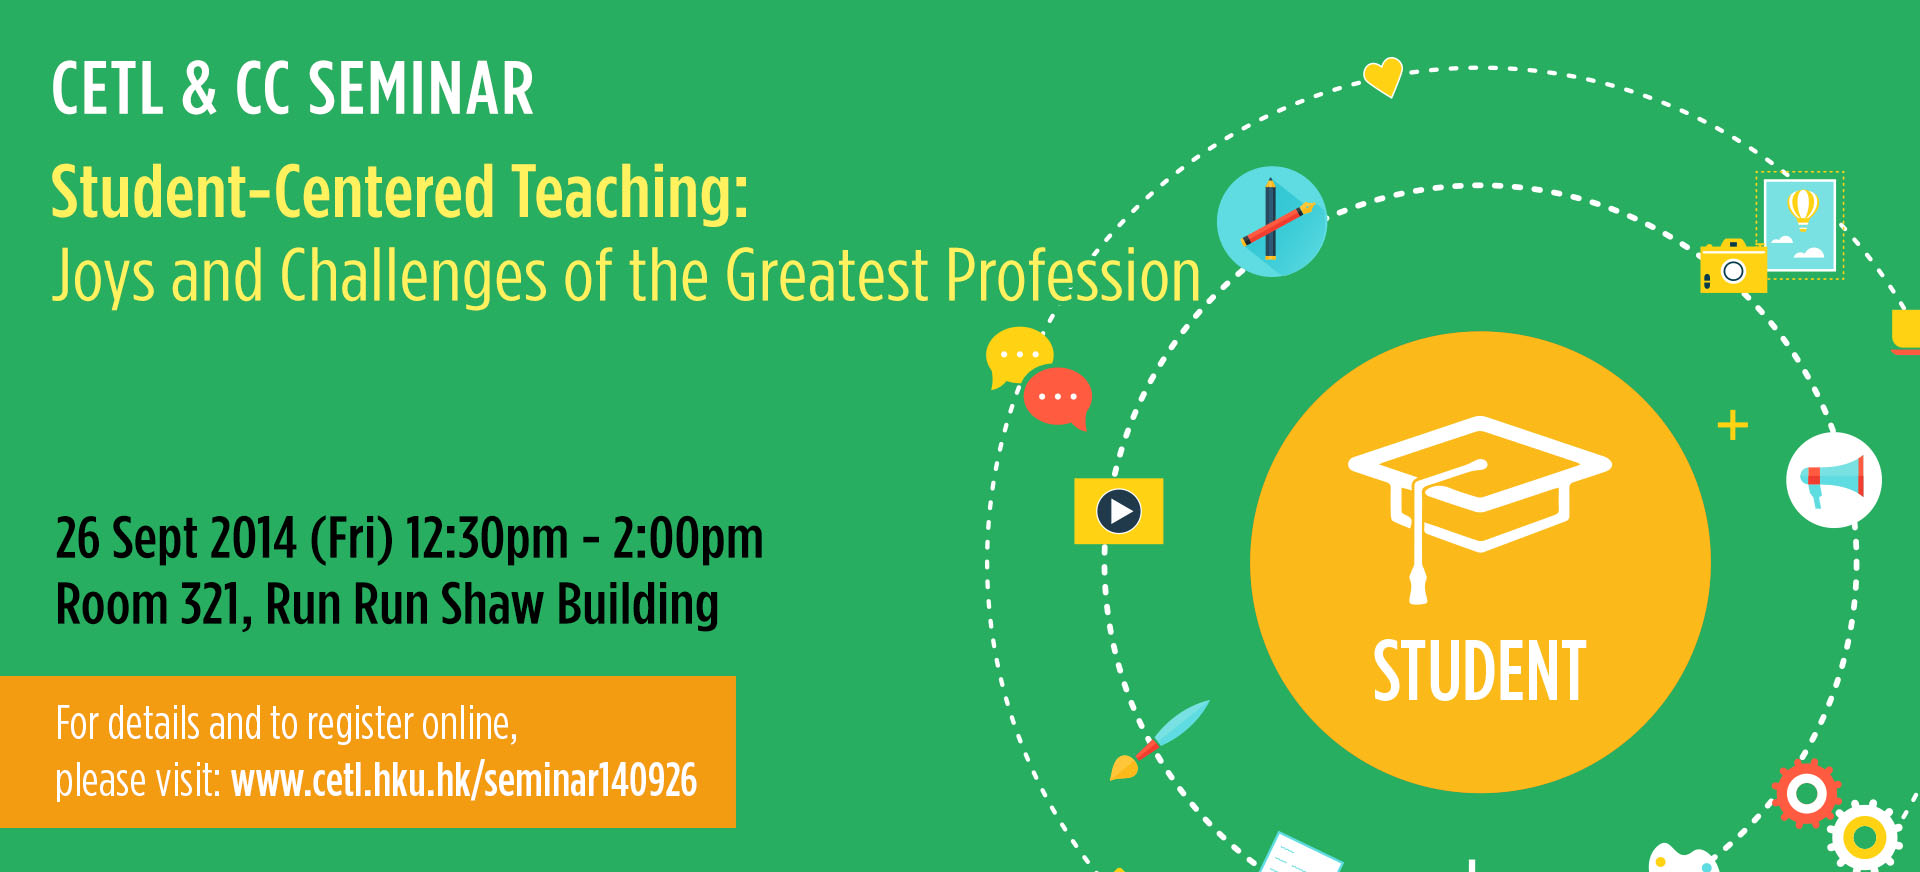 CETL & CC Seminar - Student-Centered Teaching: Joys and Challenges of the Greatest Profession